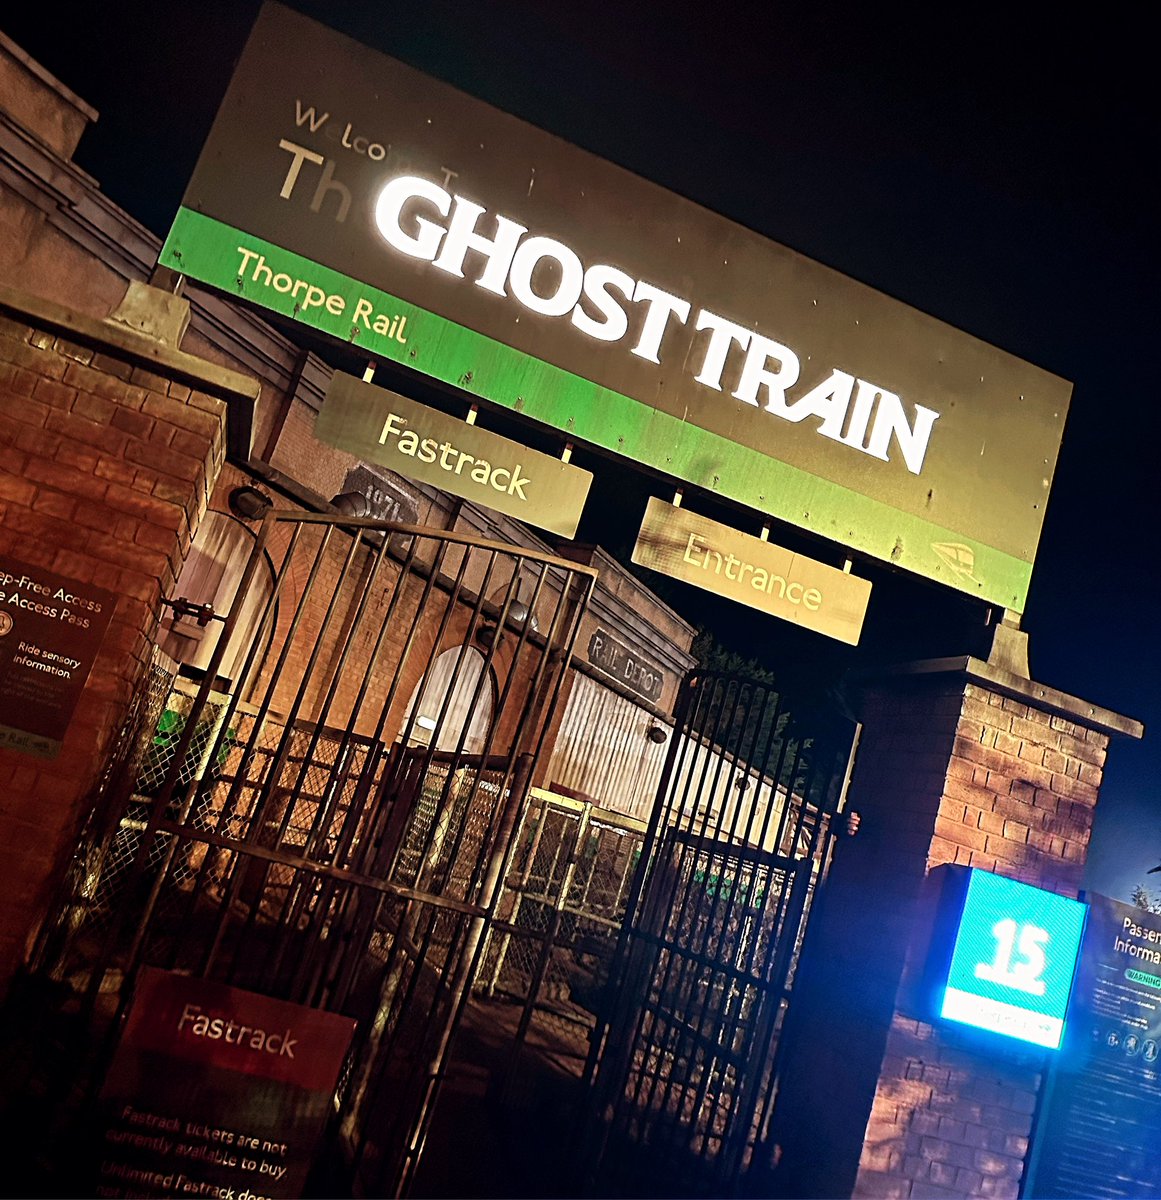 And my final thorpe ride of the year was….. Ghost Train! Only 6 in our group, hilarious and scary! The shop at the end had 10 actors jump at us! Great way to end the season 😃
#myghosttrain #thorpepark #DBGT #frightnights #endofseason